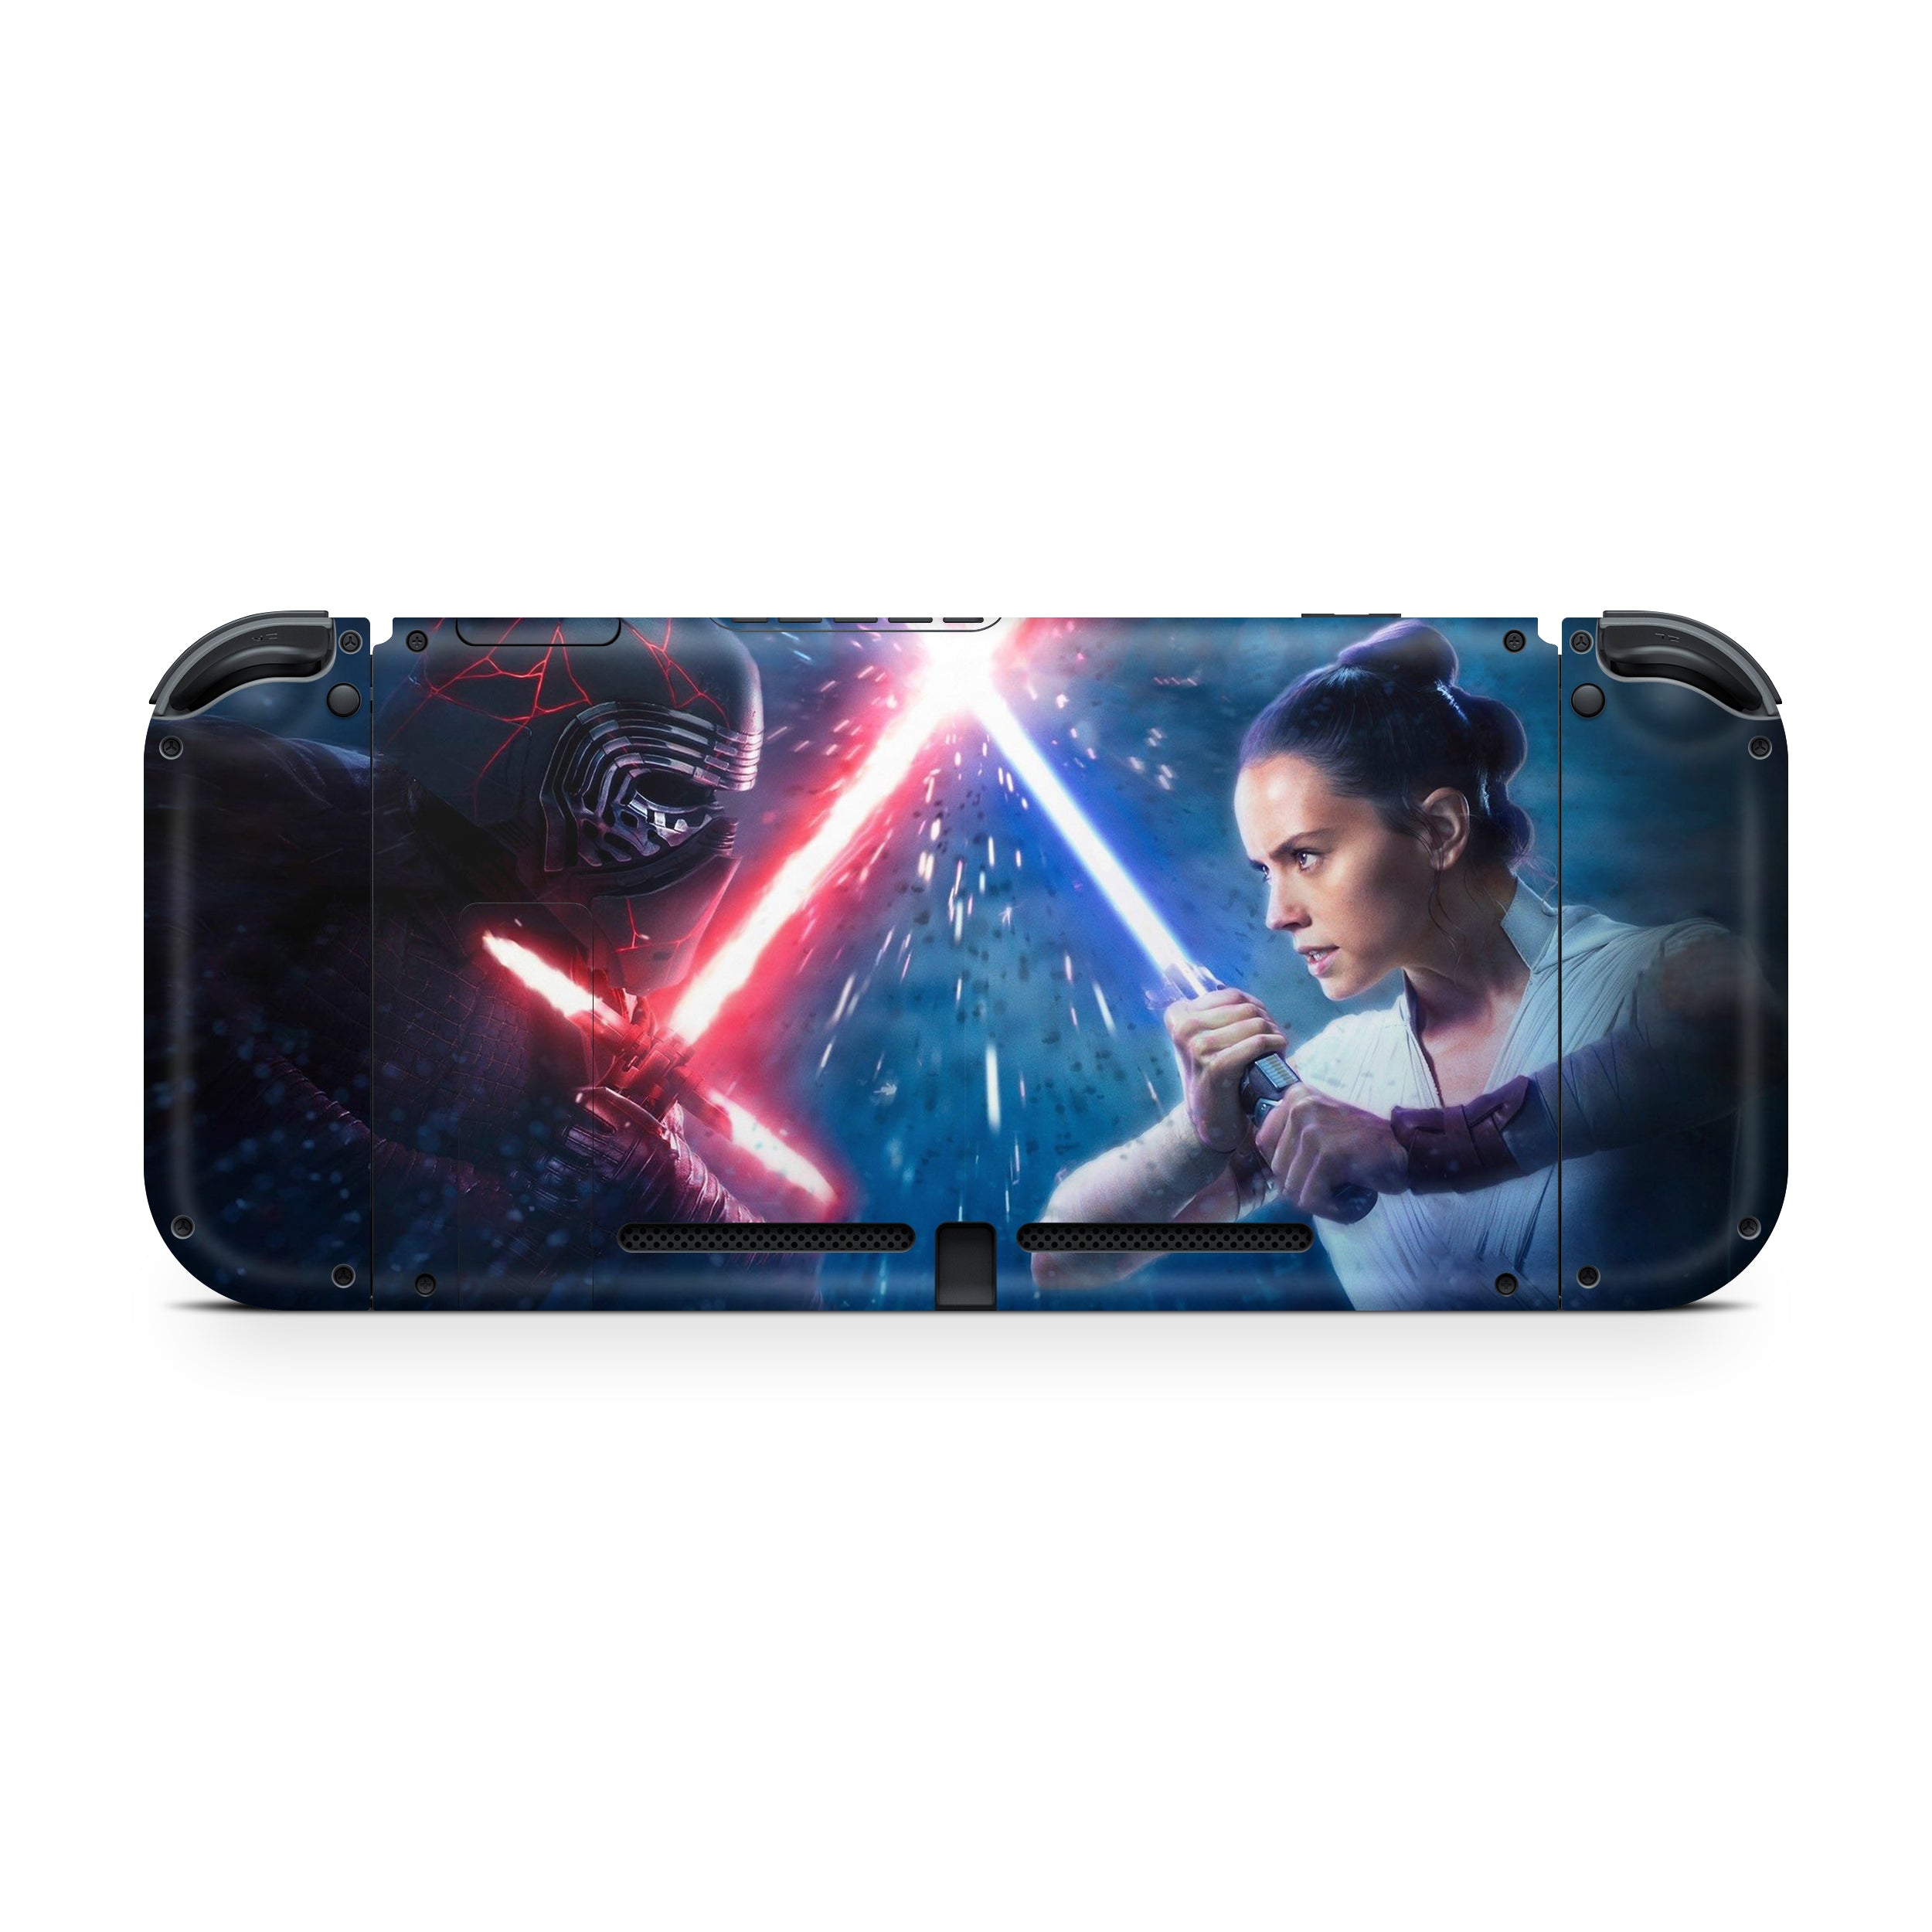 A video game skin featuring a Star Wars Rey Kylo Ren design for the Nintendo Switch.